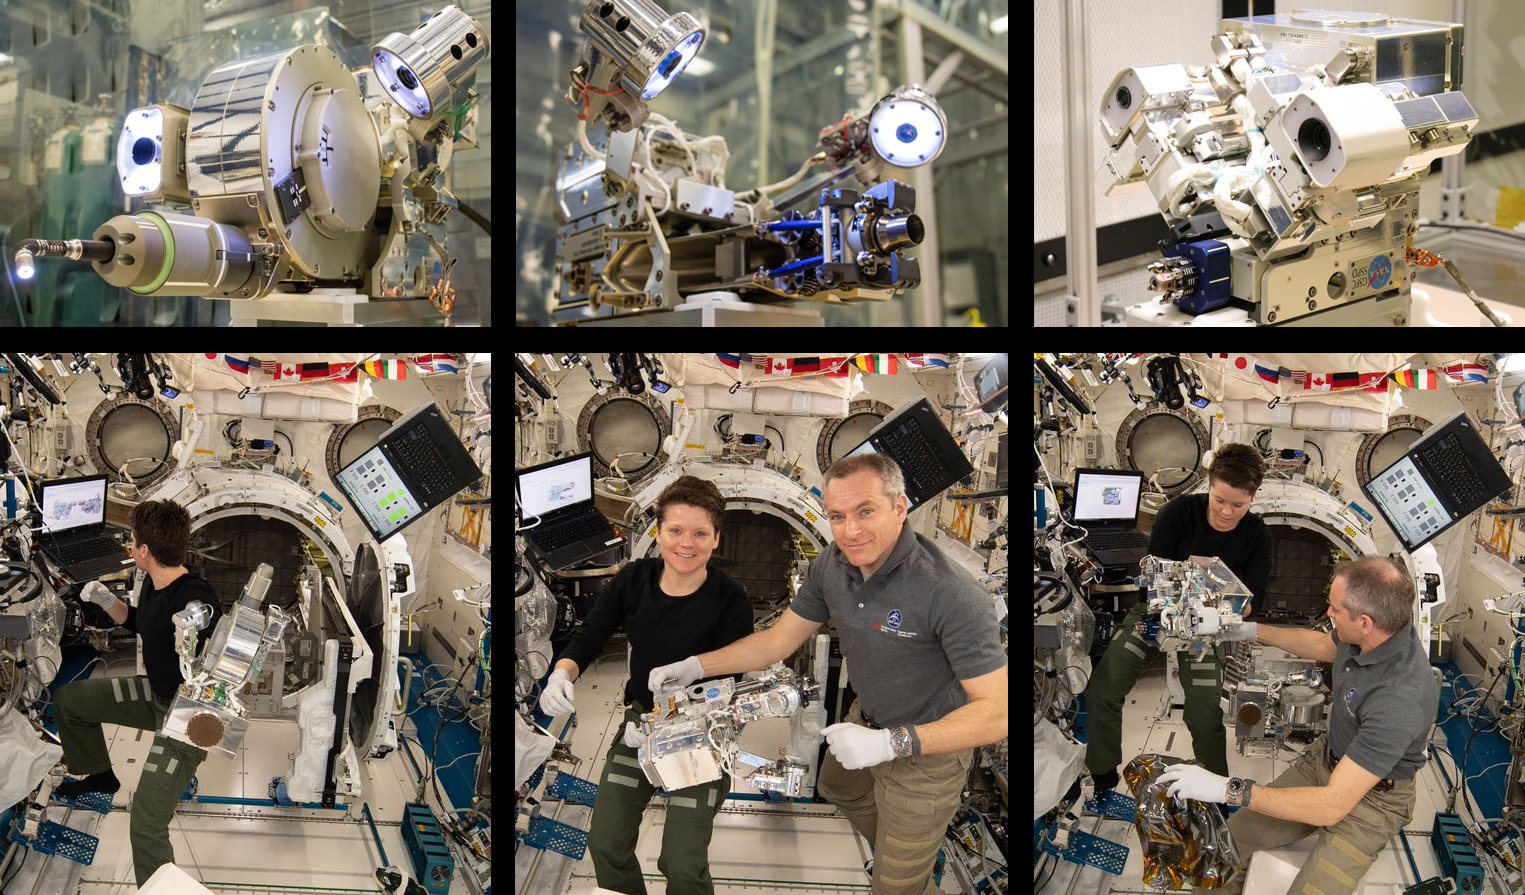 Six images of RRM3 tools and ISS astronauts in a grid. The top three images are al of shiny, high tech tools. The bottom three show two astronauts smiling and working with the tools, floating in the Space Station.